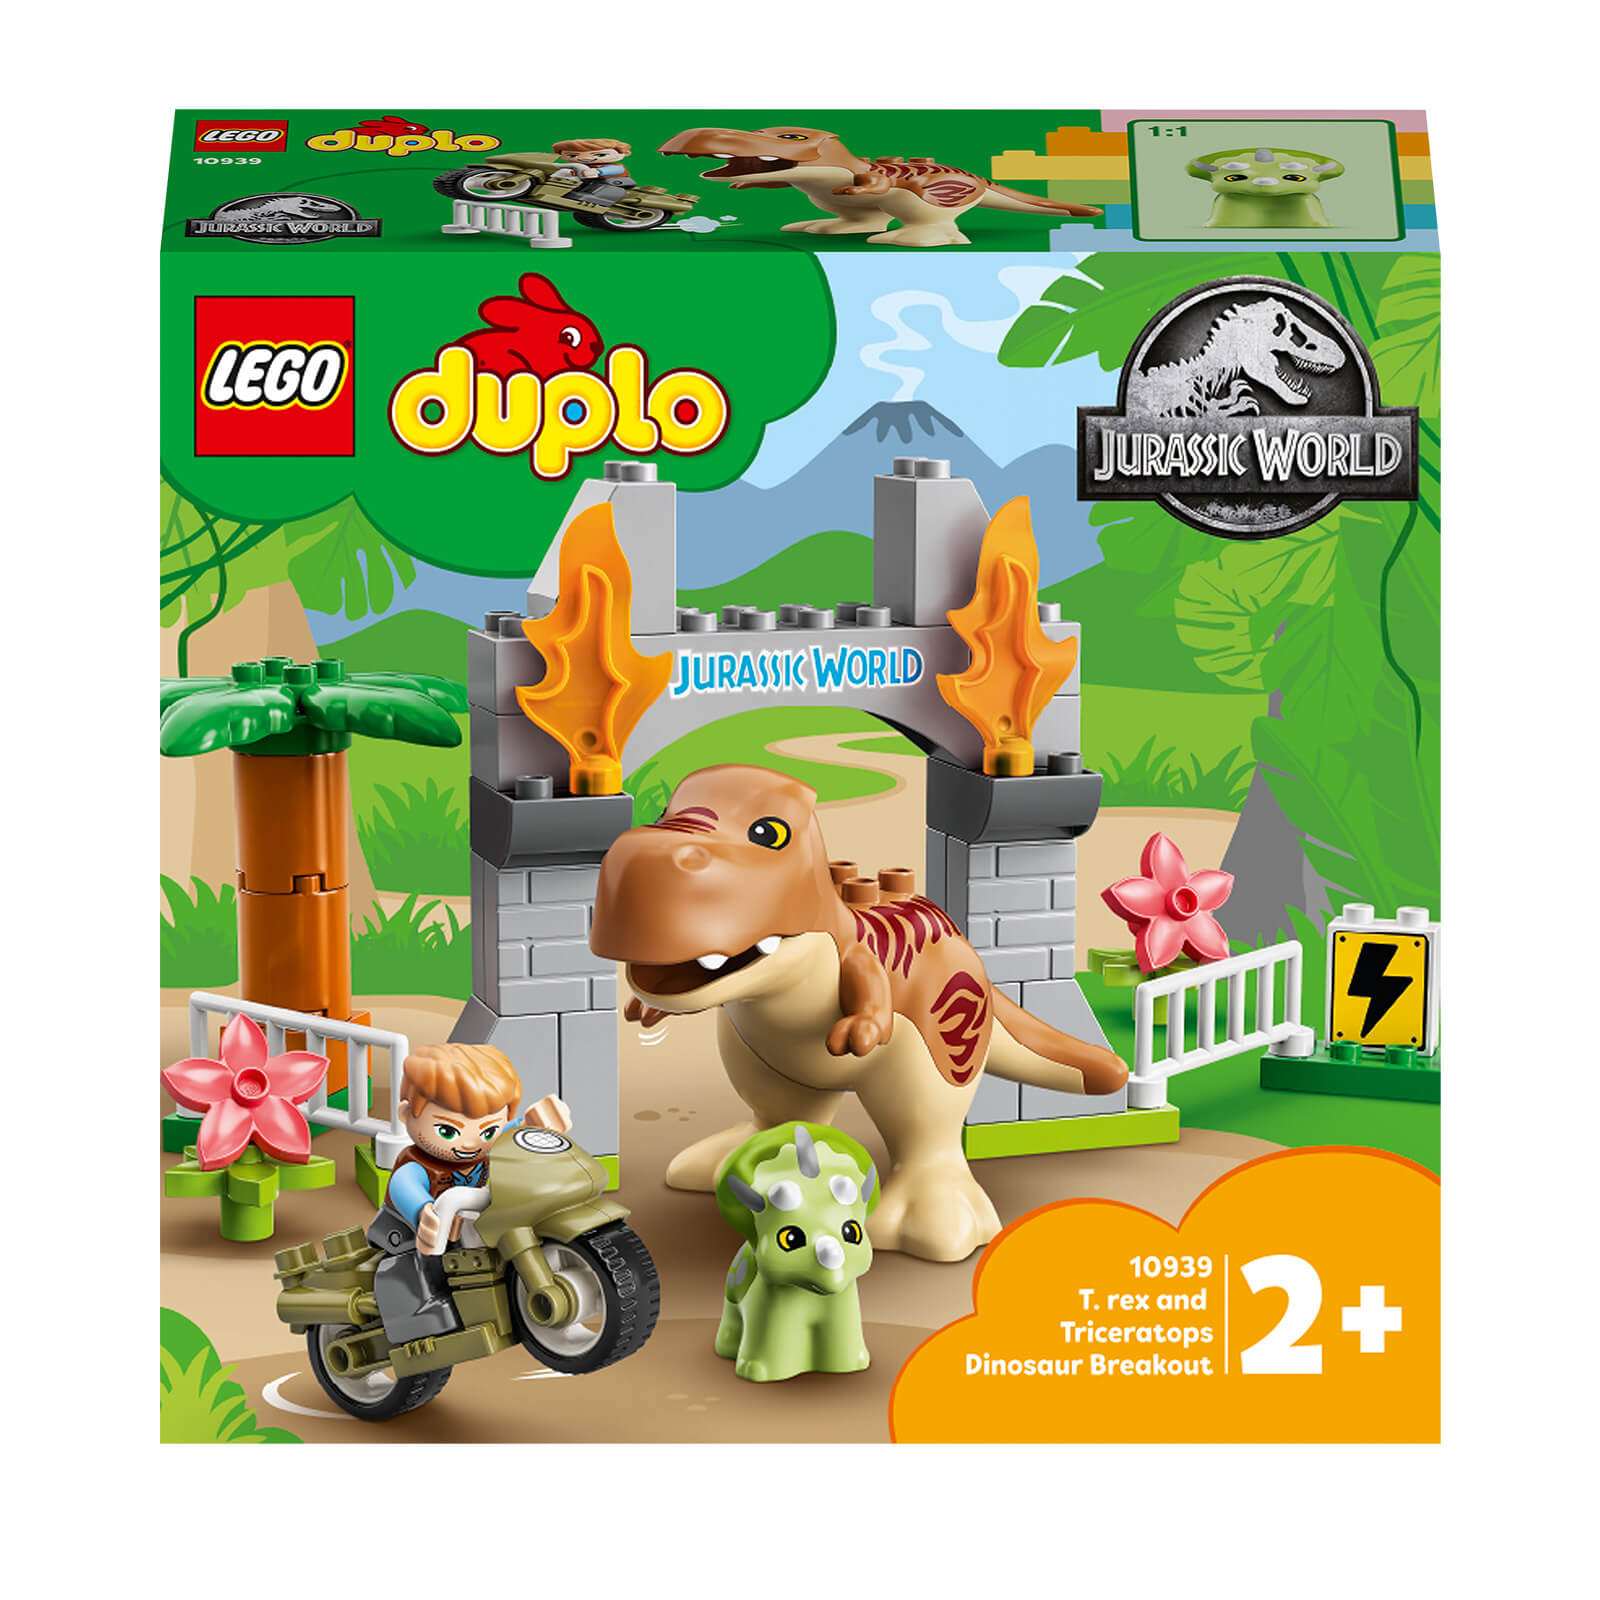 LEGO DUPLO T. rex and Triceratops Dinosaur Breakout Toy for Toddlers (10939)